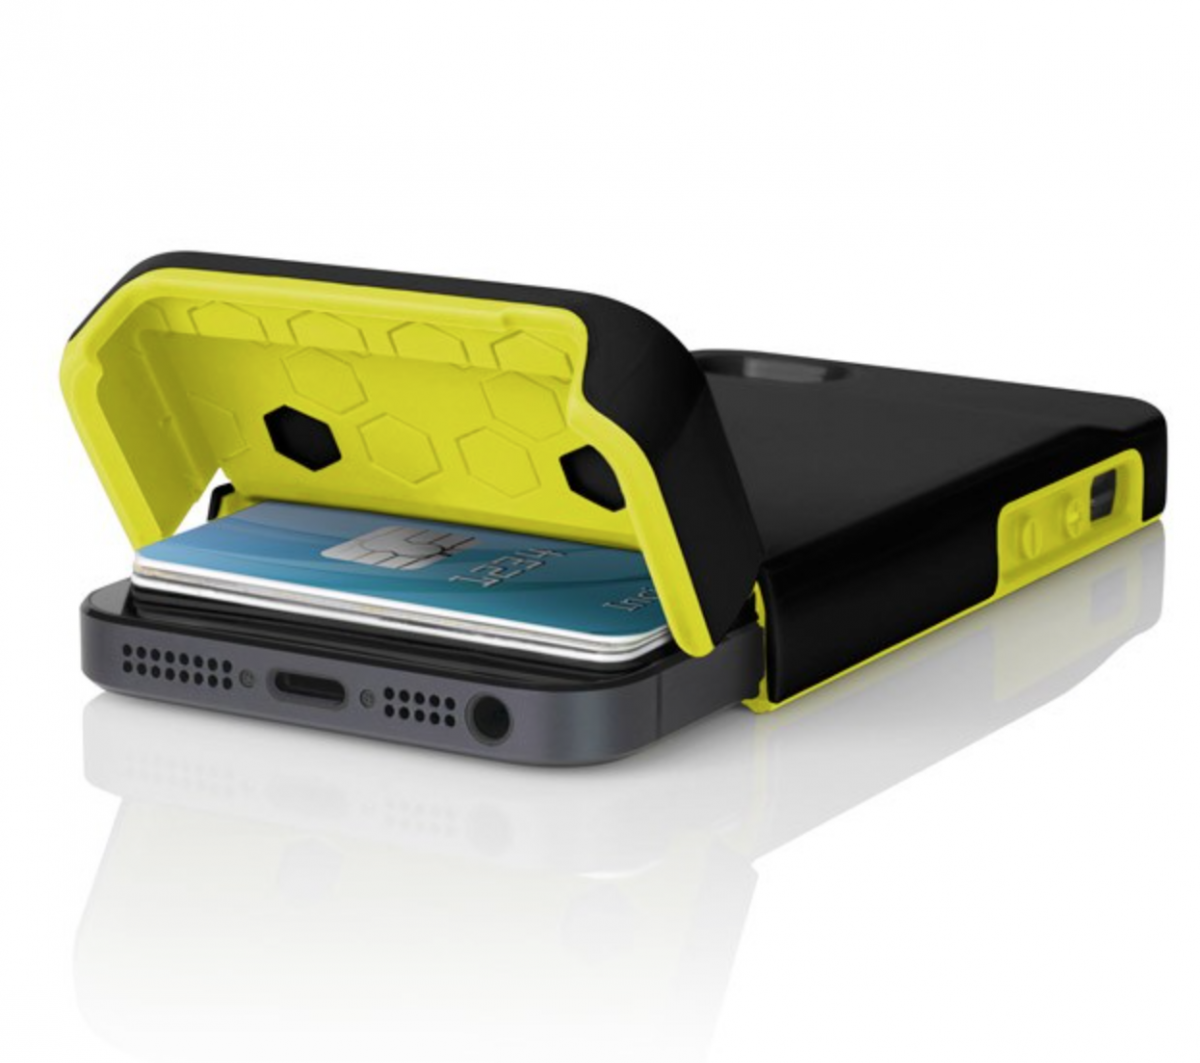 Incipio Stashback Dockable Credit Card Case for iPhone 5s